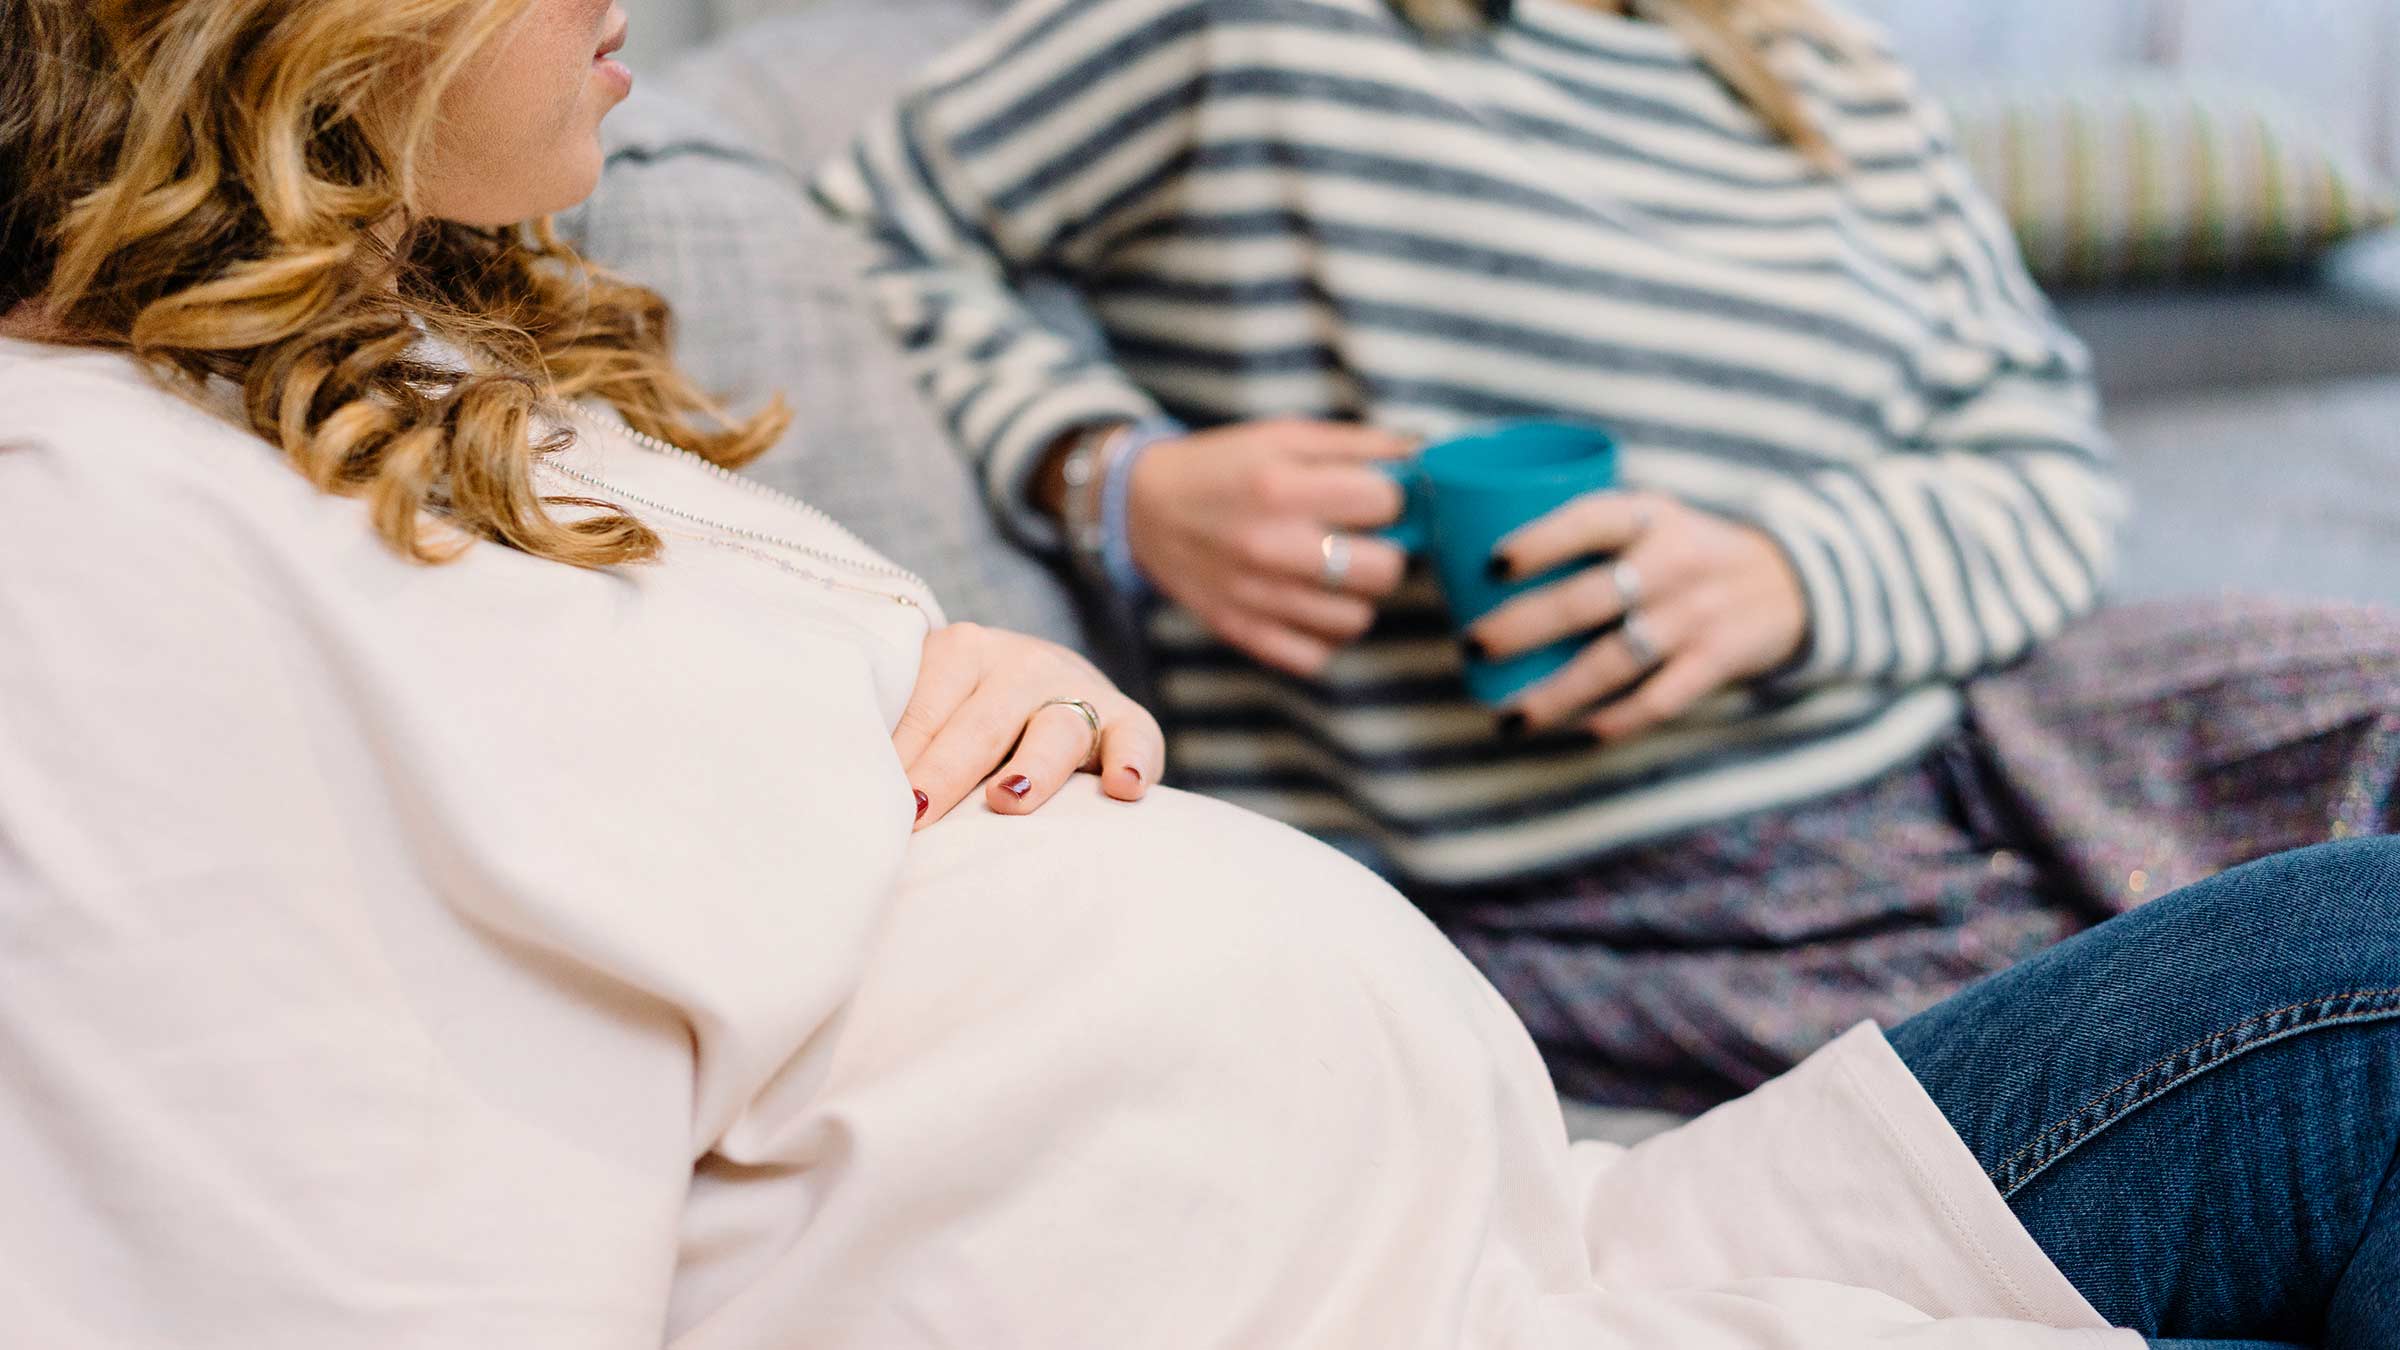 Pregnant woman and a friend have a conversation while sitting on a couch